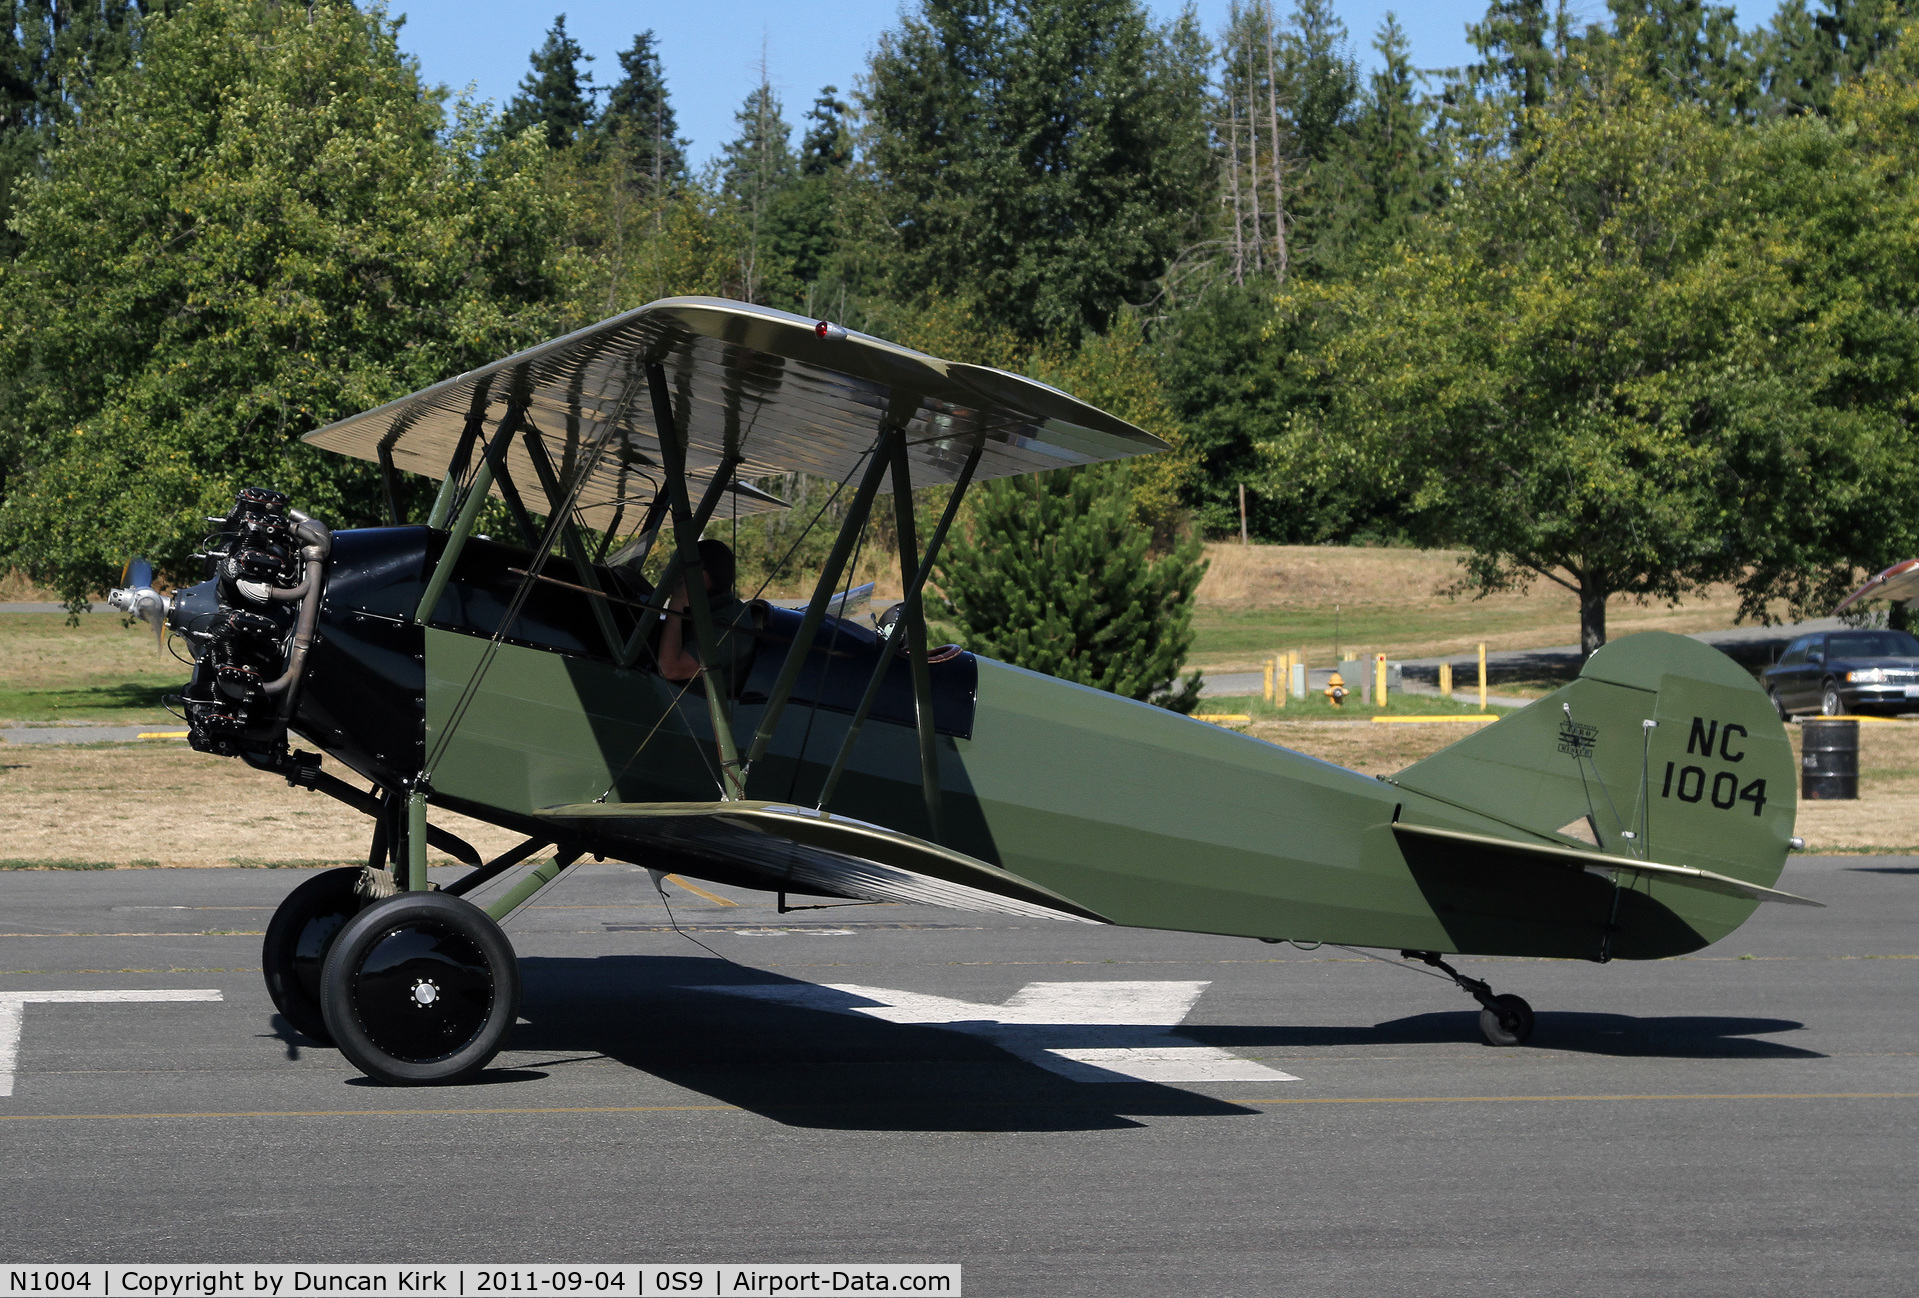 N1004, 1928 Curtiss-Wright Travel Air 4000 C/N 416, Taxiing in after a joy ride